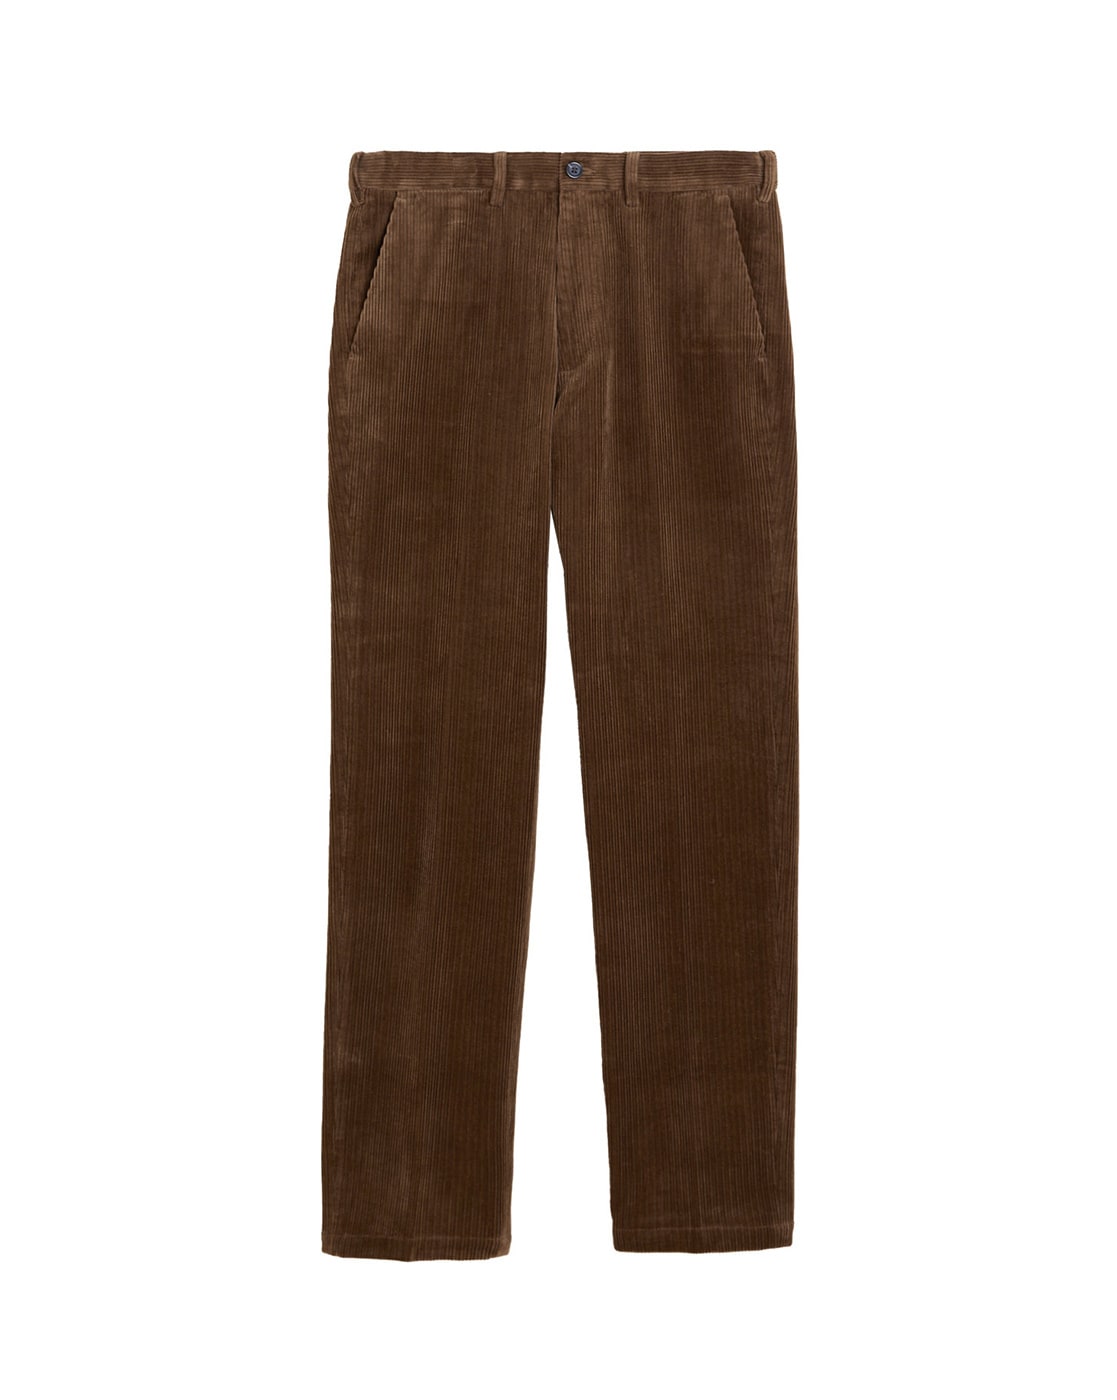 Buy Allen Solly Brown Cotton Skinny Fit Jeans for Mens Online @ Tata CLiQ